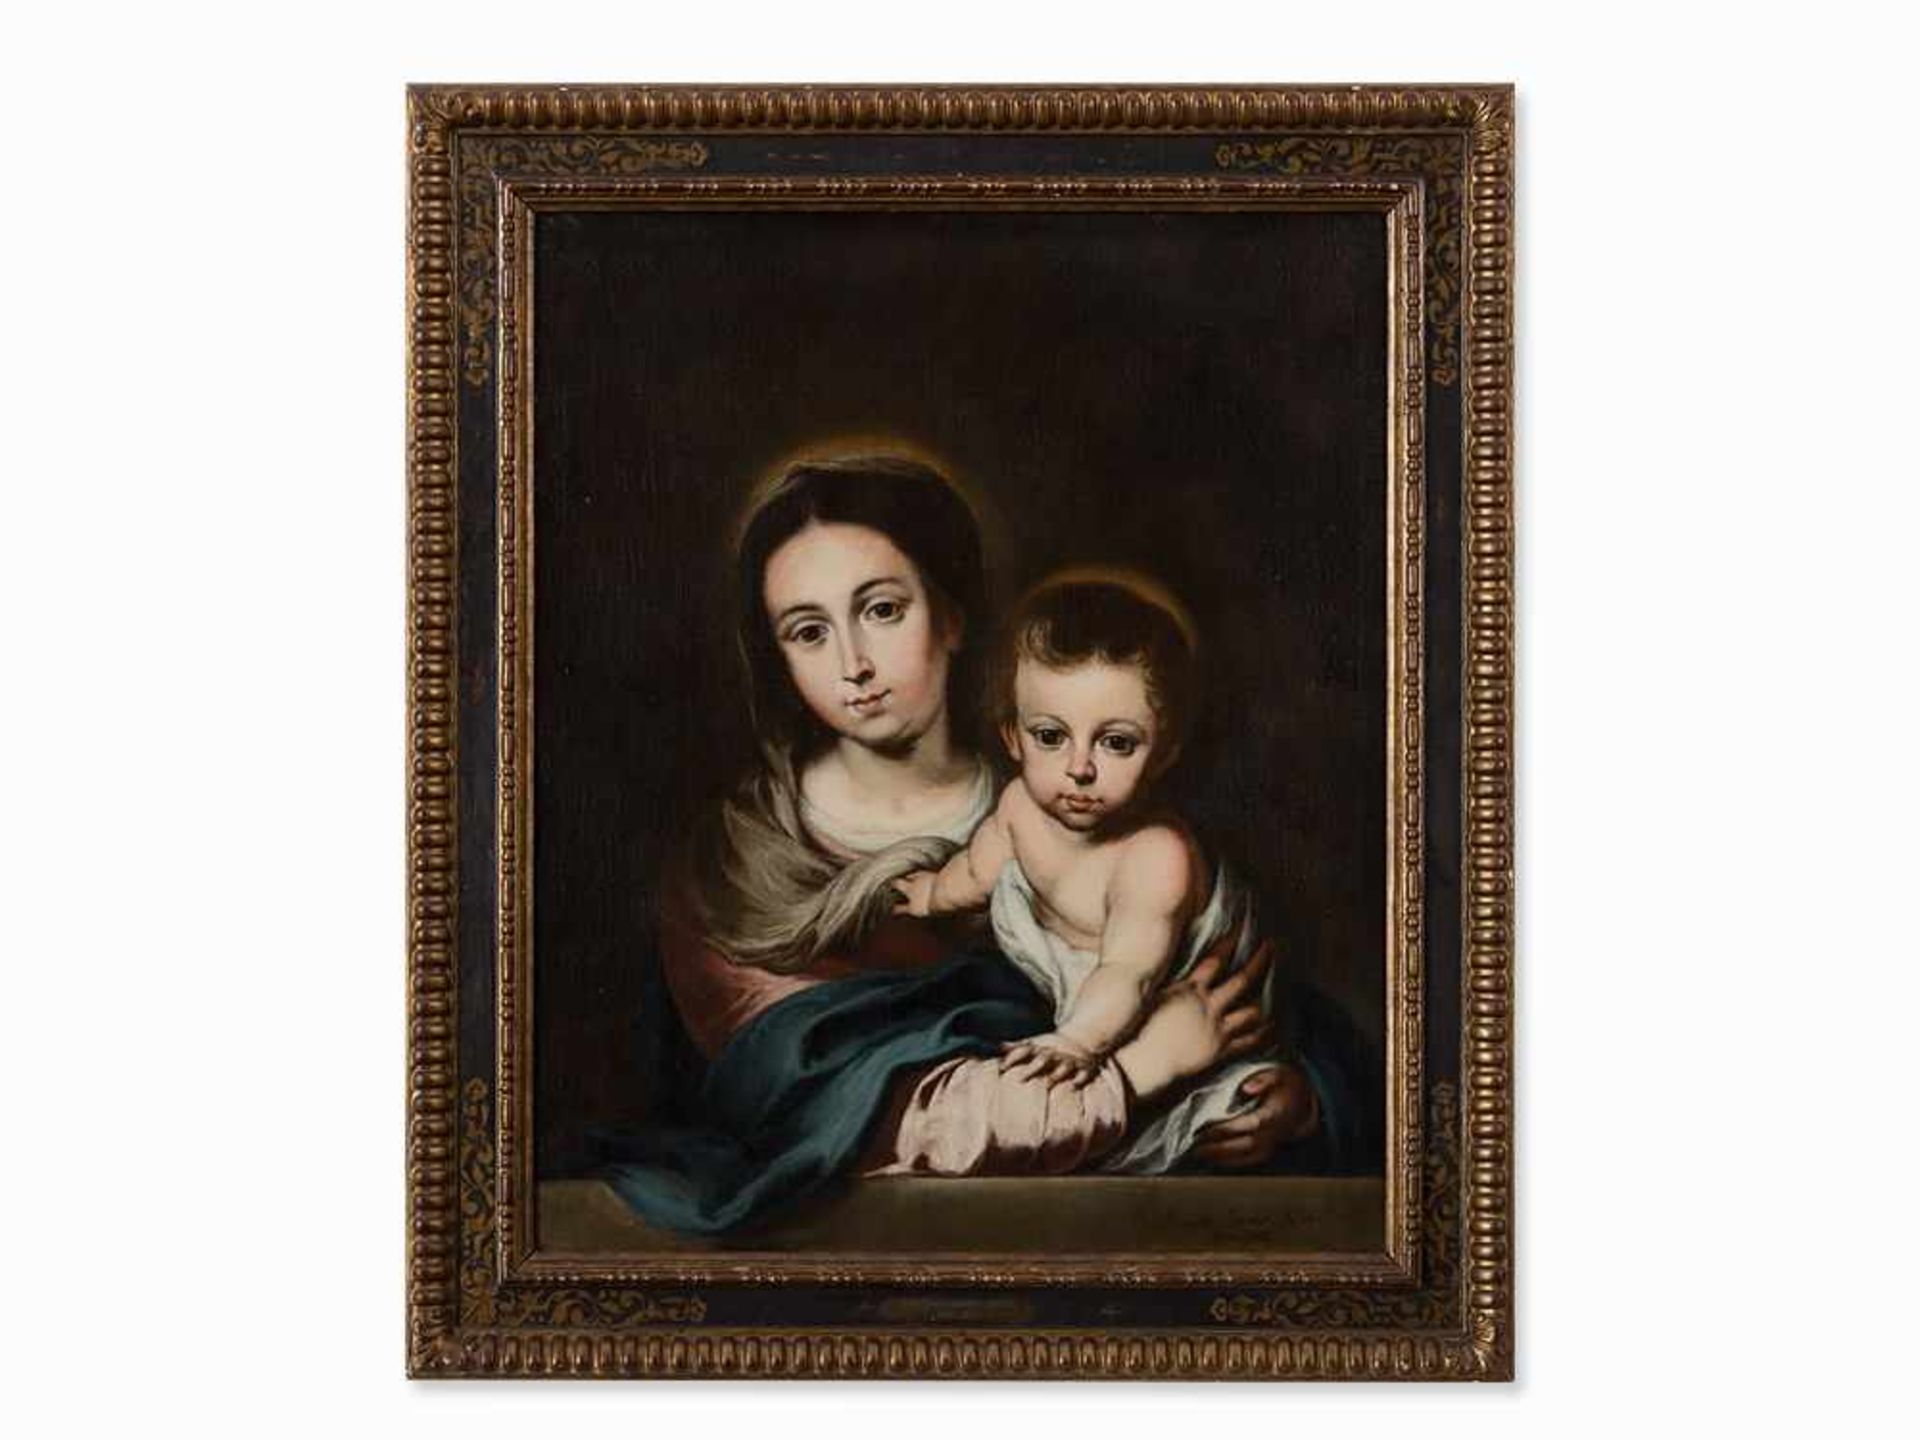 Bernardo Germán y Llorente (1680-1759), Madonna with Child,1742 Oil on canvas, relined around the